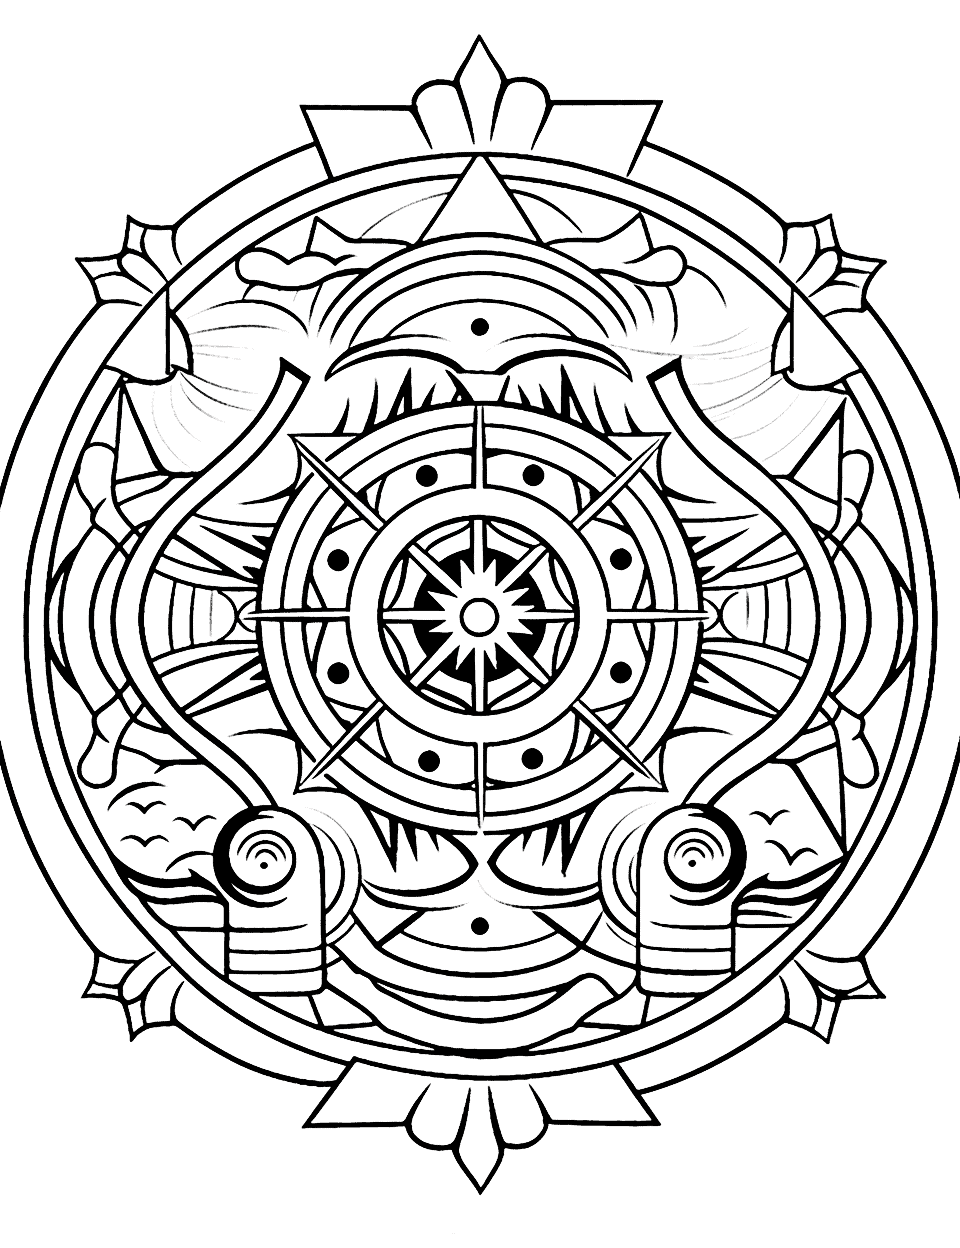 Pirate Adventure Mandala Coloring Page - A cool mandala featuring a pirate ship, treasure chests, and mysterious islands.